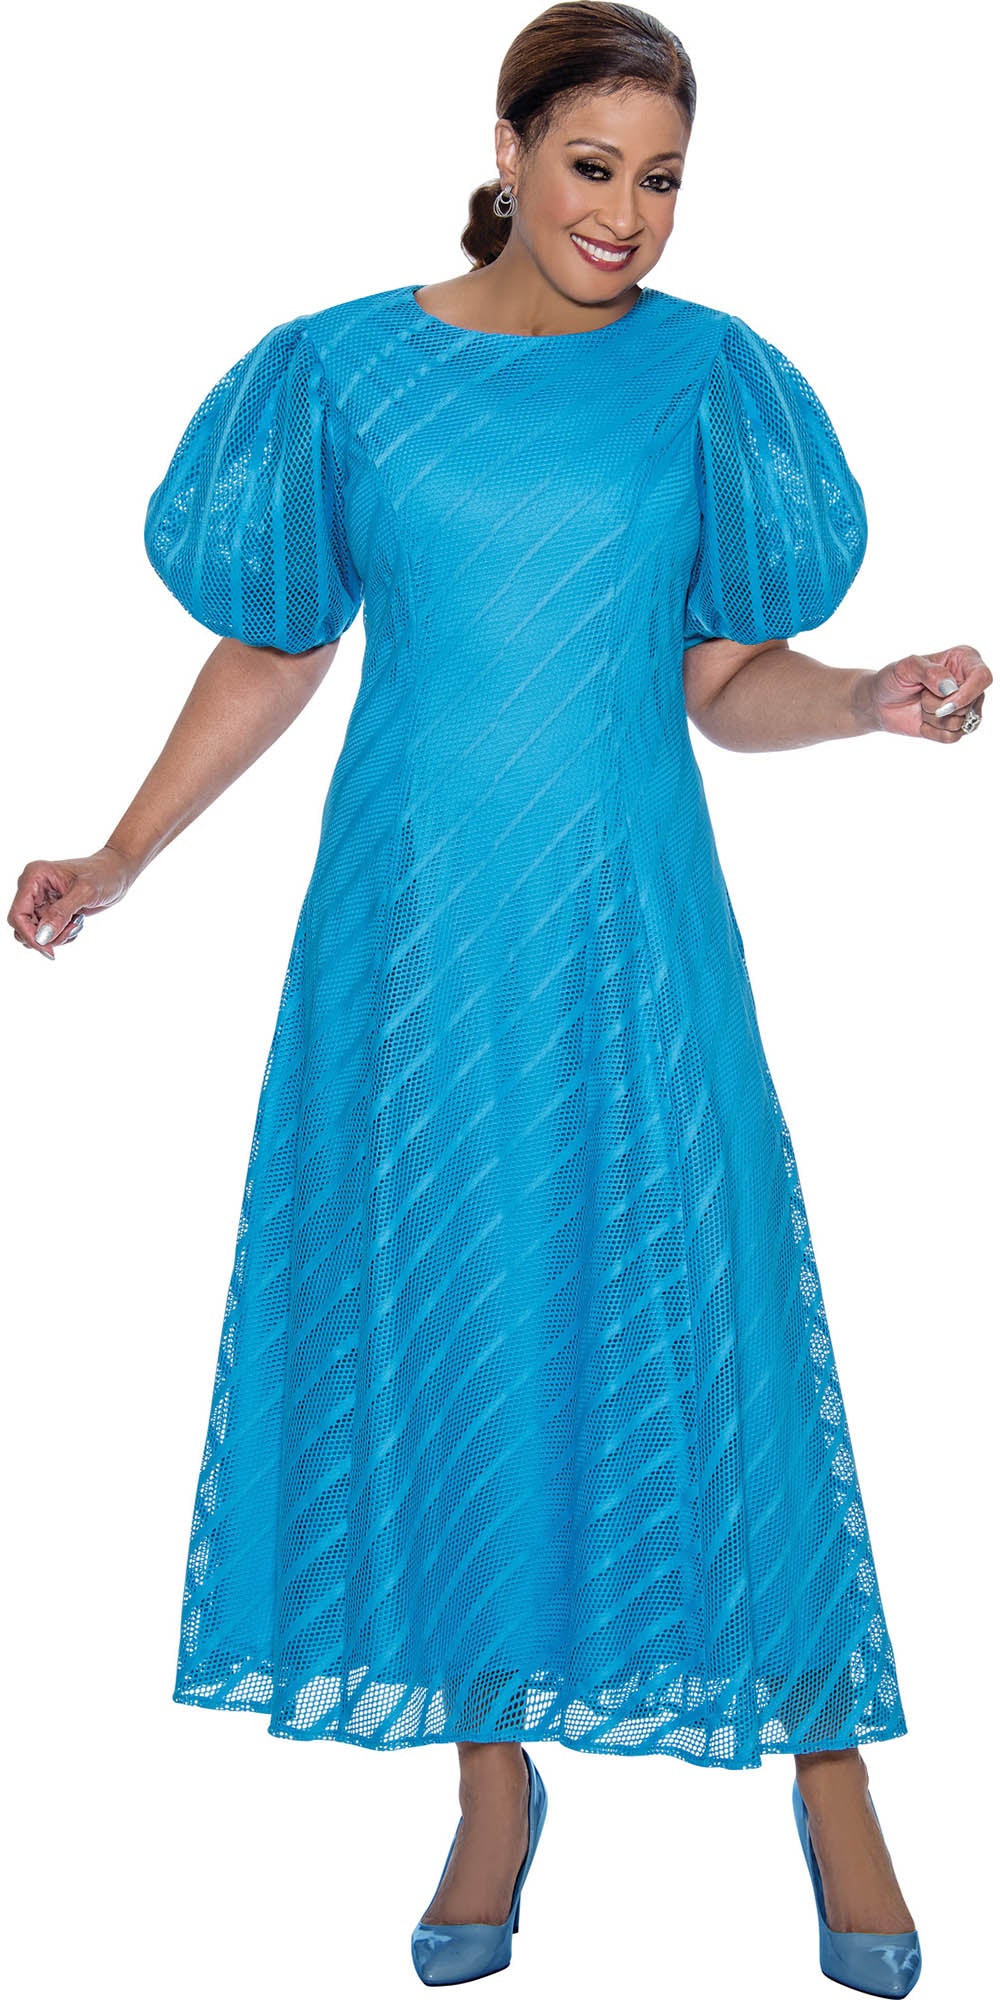 DCC - DCC4121- Turquoise Mesh Maxidress with Short Puff Sleeves